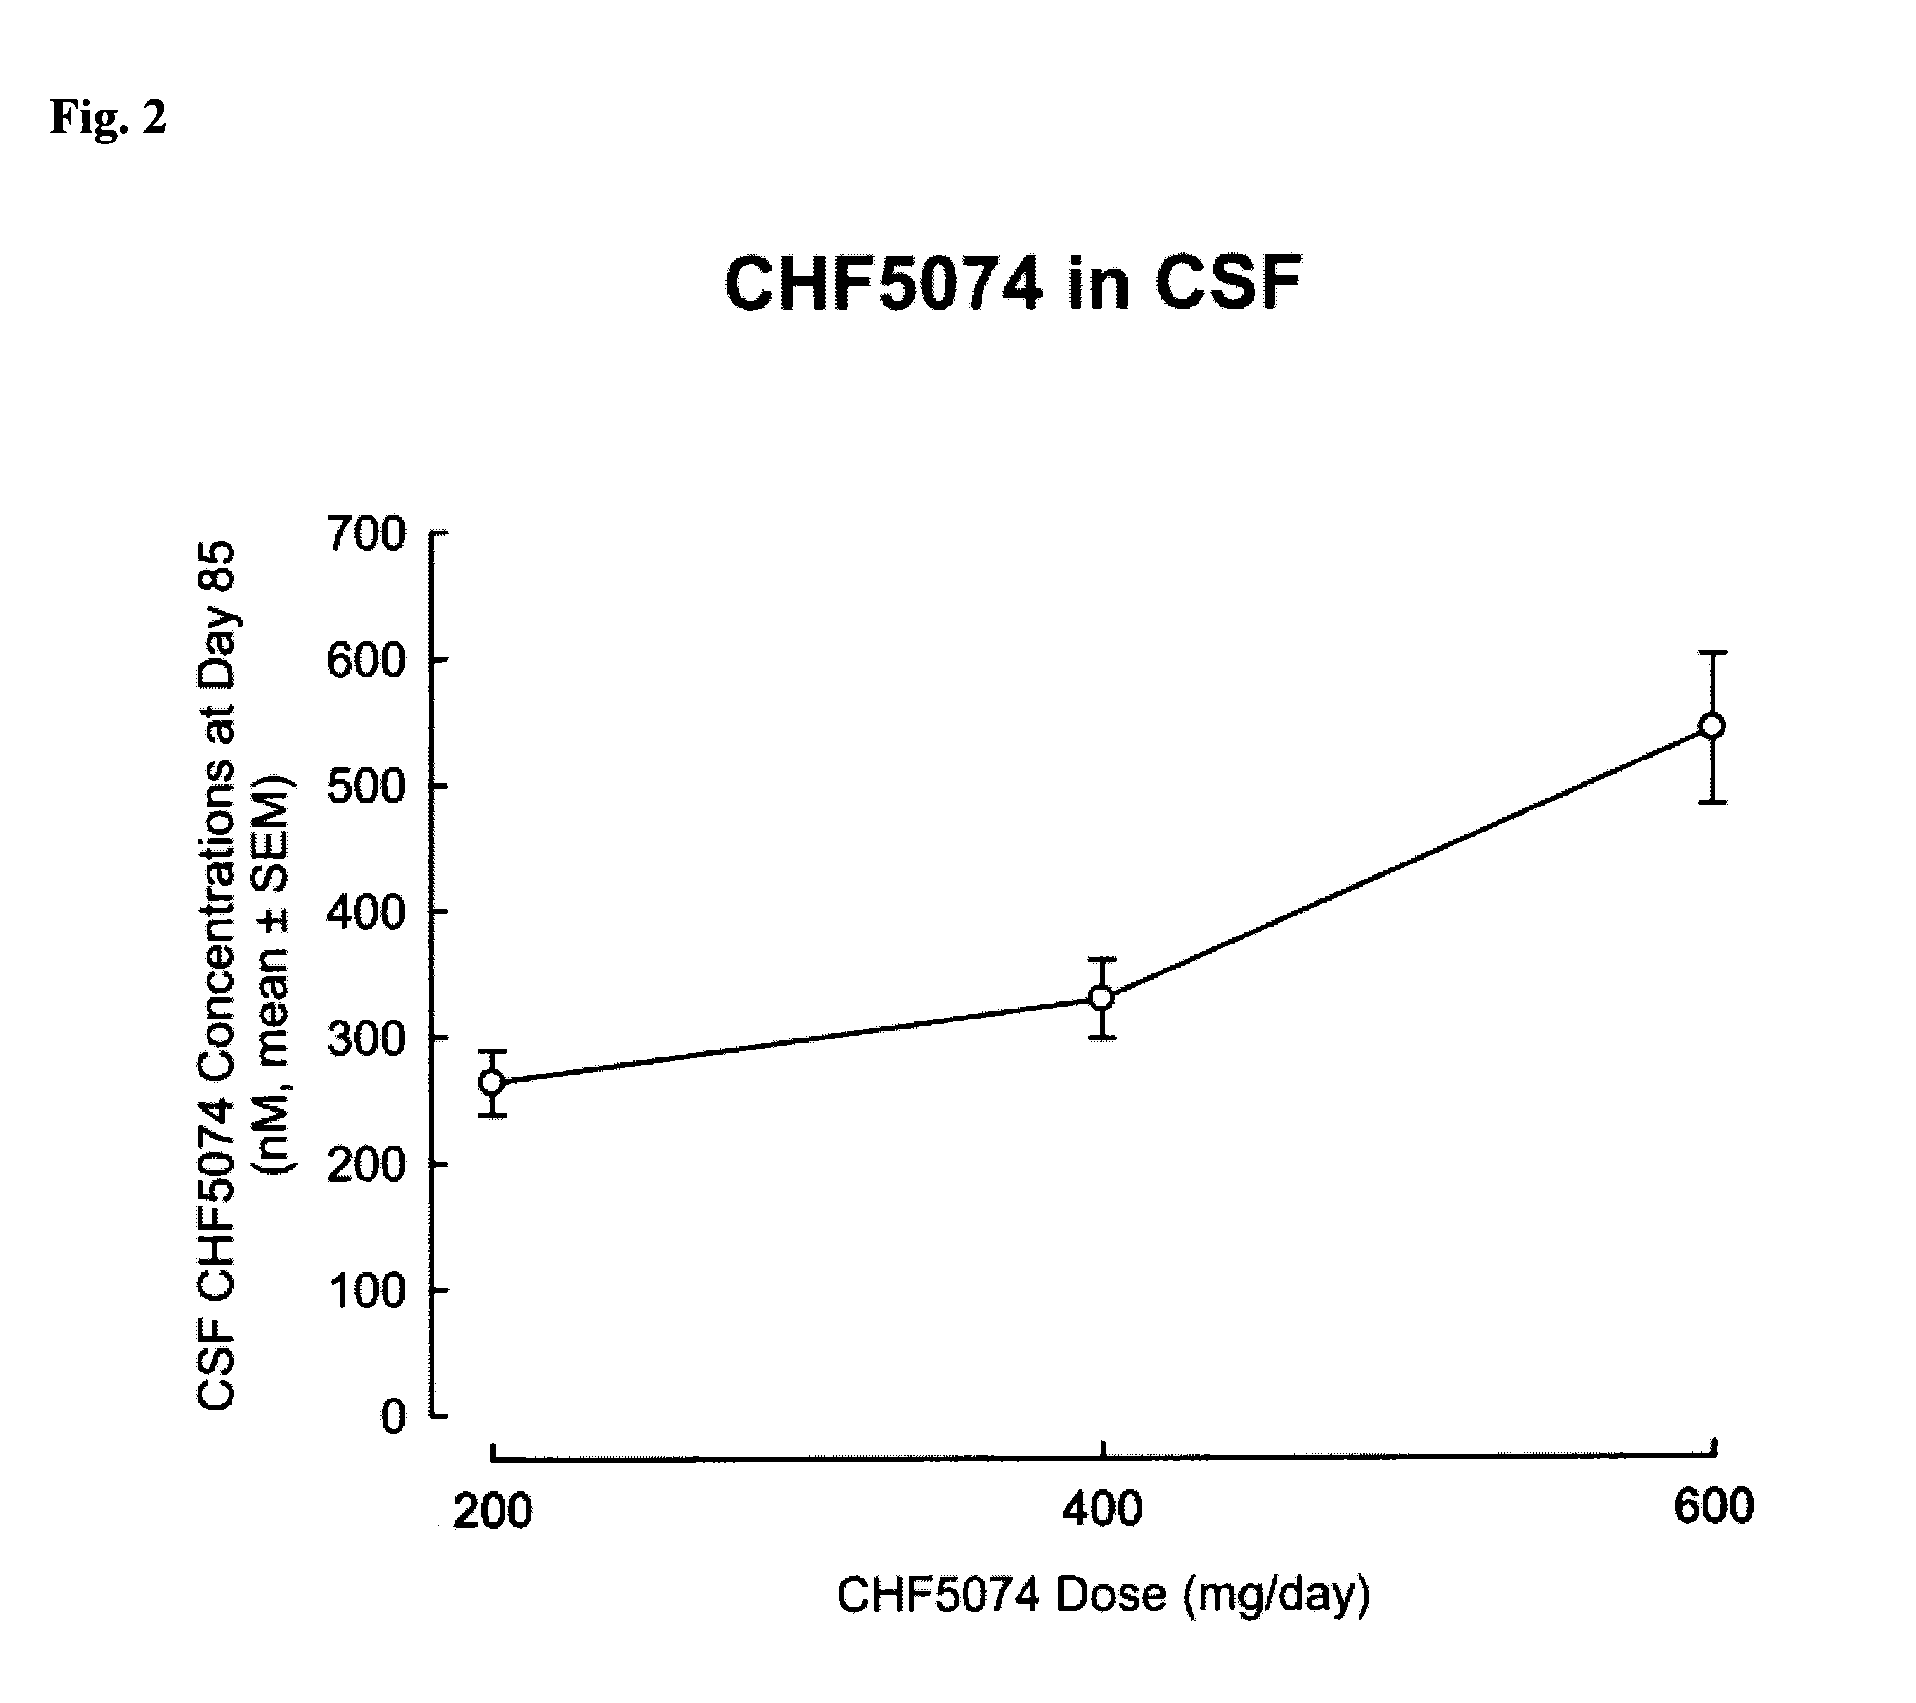 Formulations and methods of treating alzheimer's disease and other proteinopathies by combination therapy